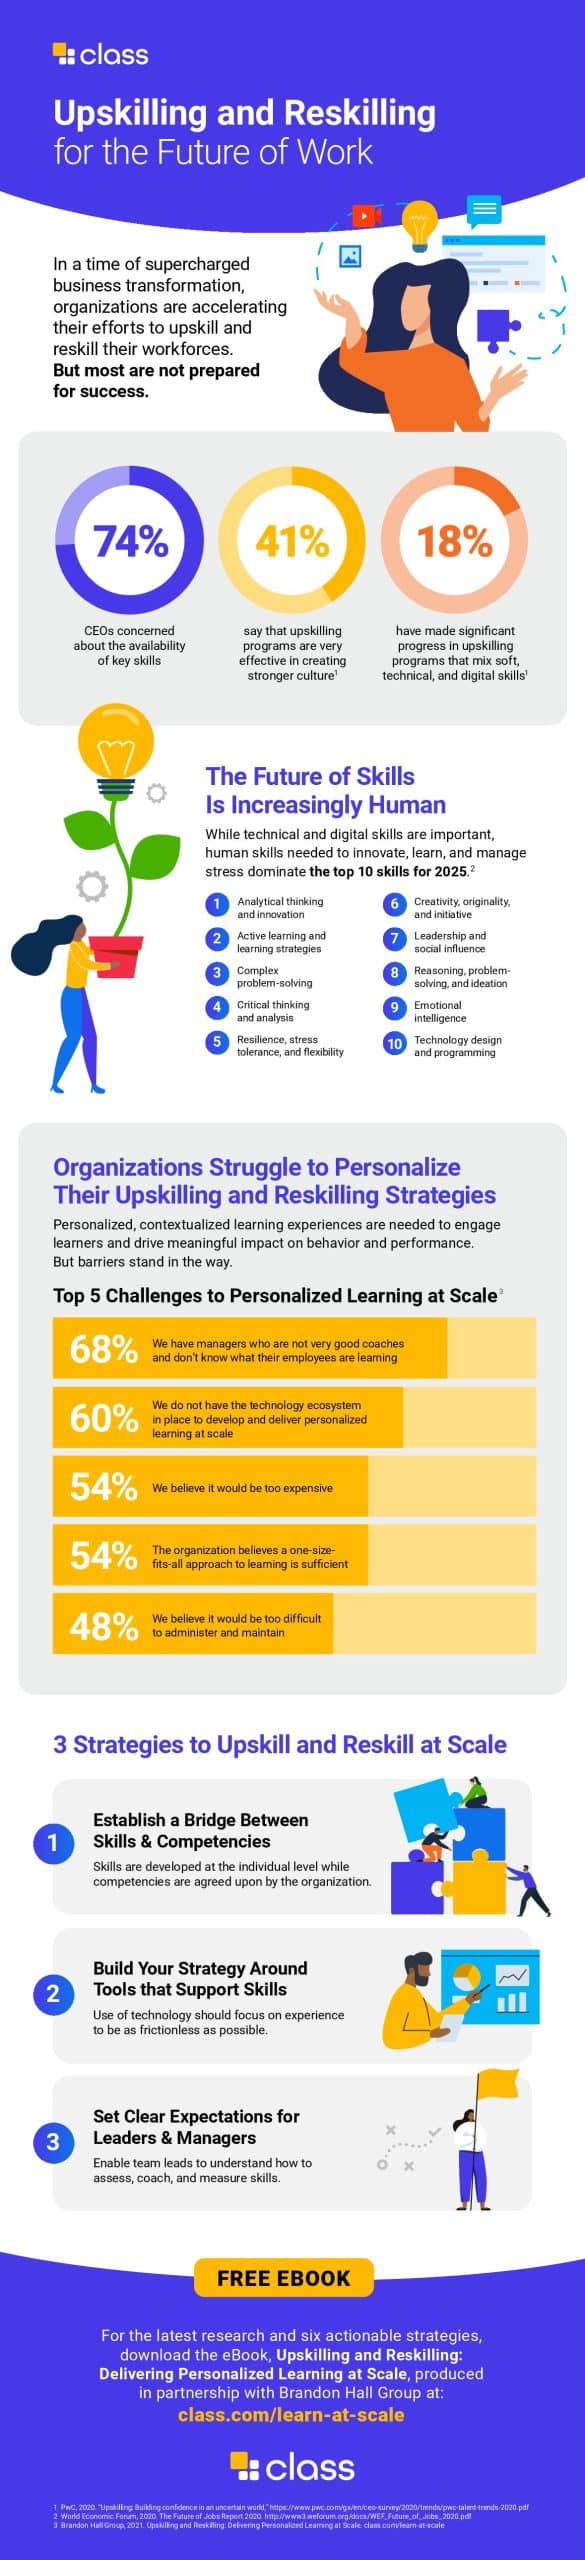 upskilling and reskilling infographic